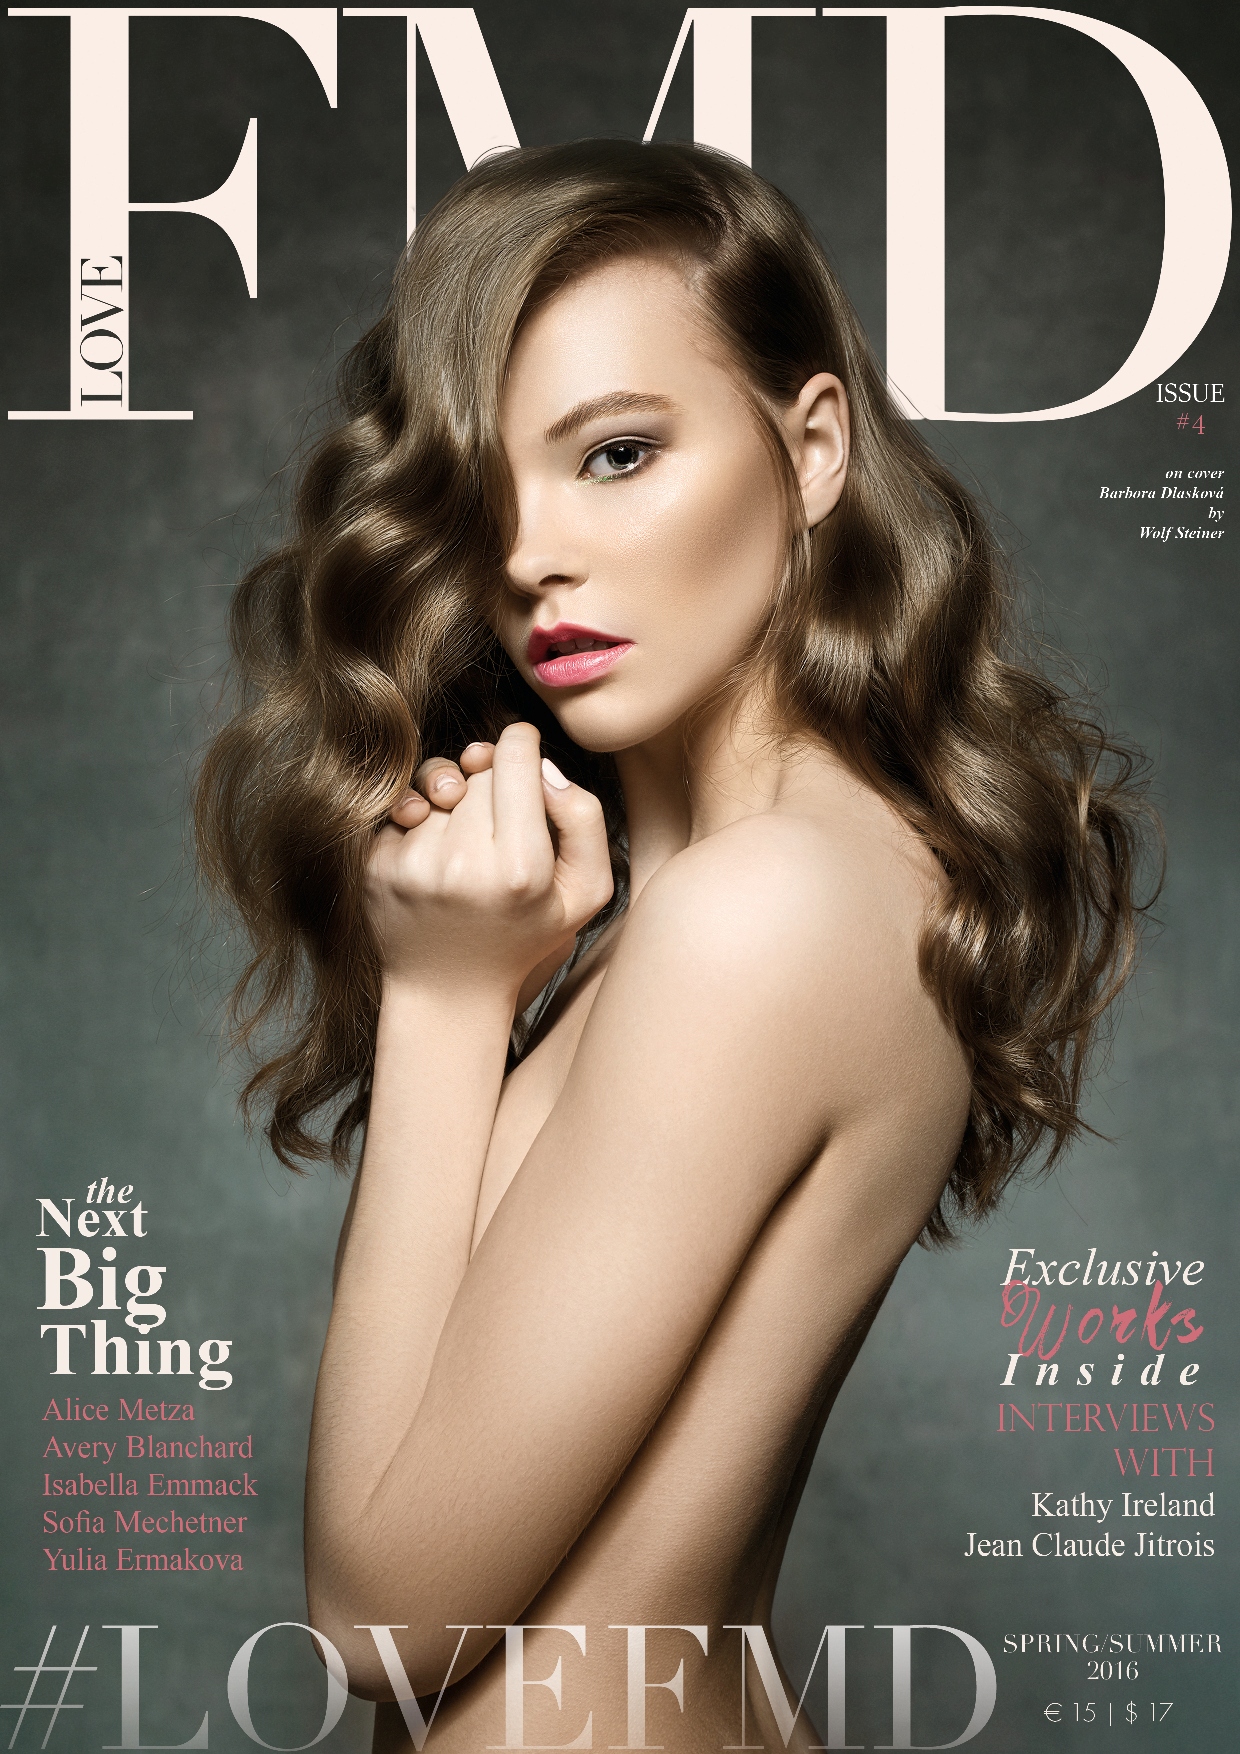 lovefmd-issue-4